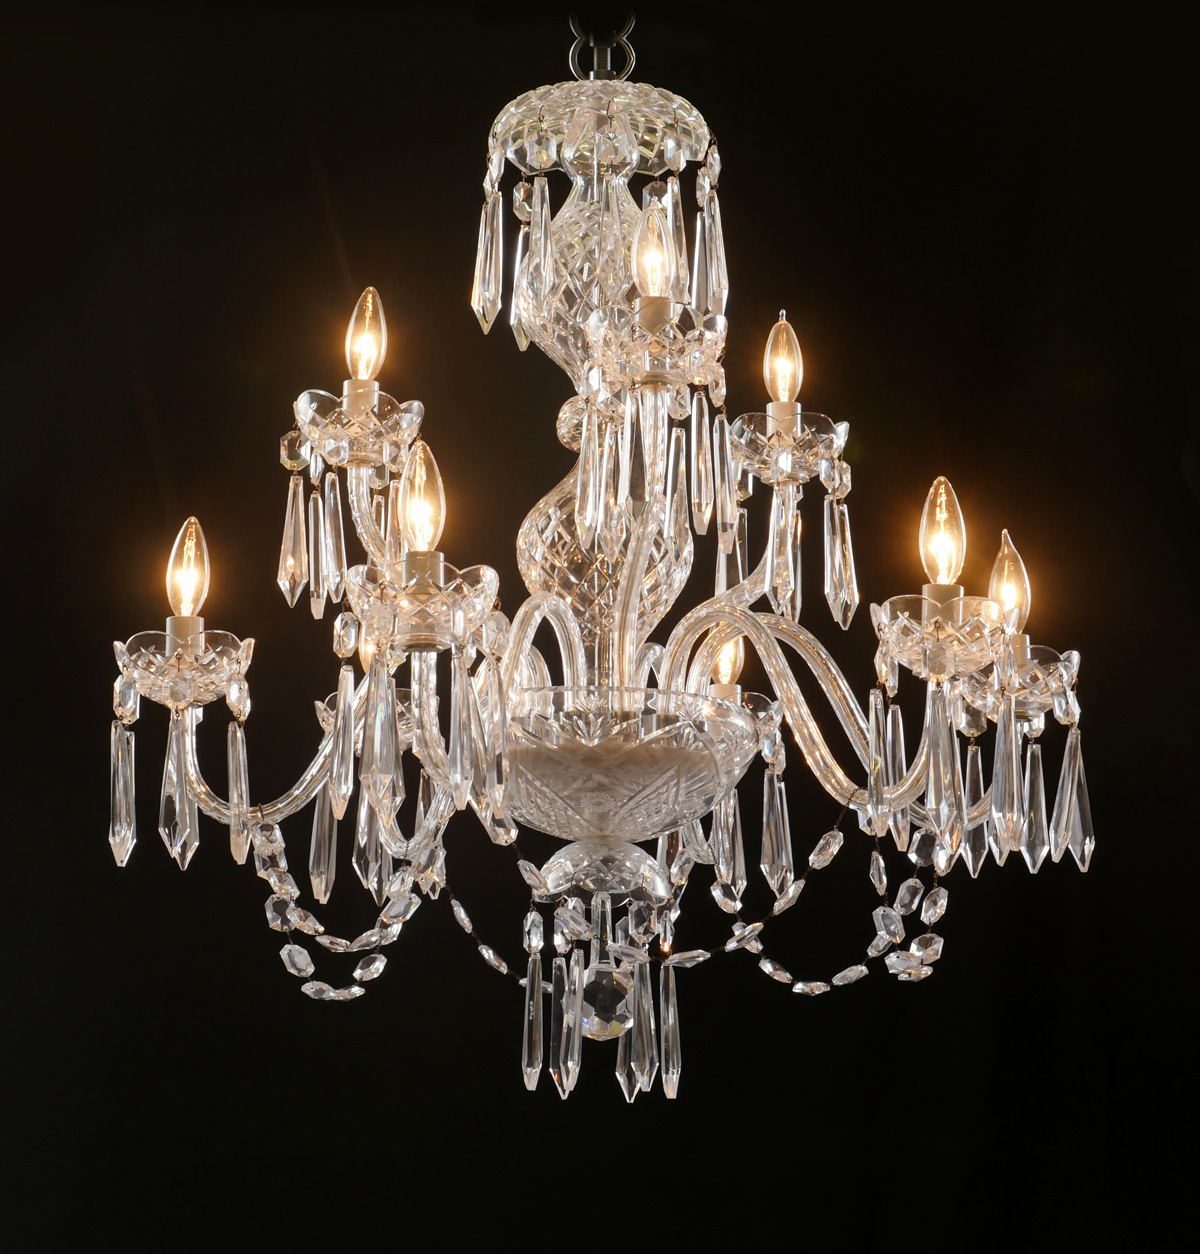 WATERFORD CRYSTAL CHANDELIER: 9- Light